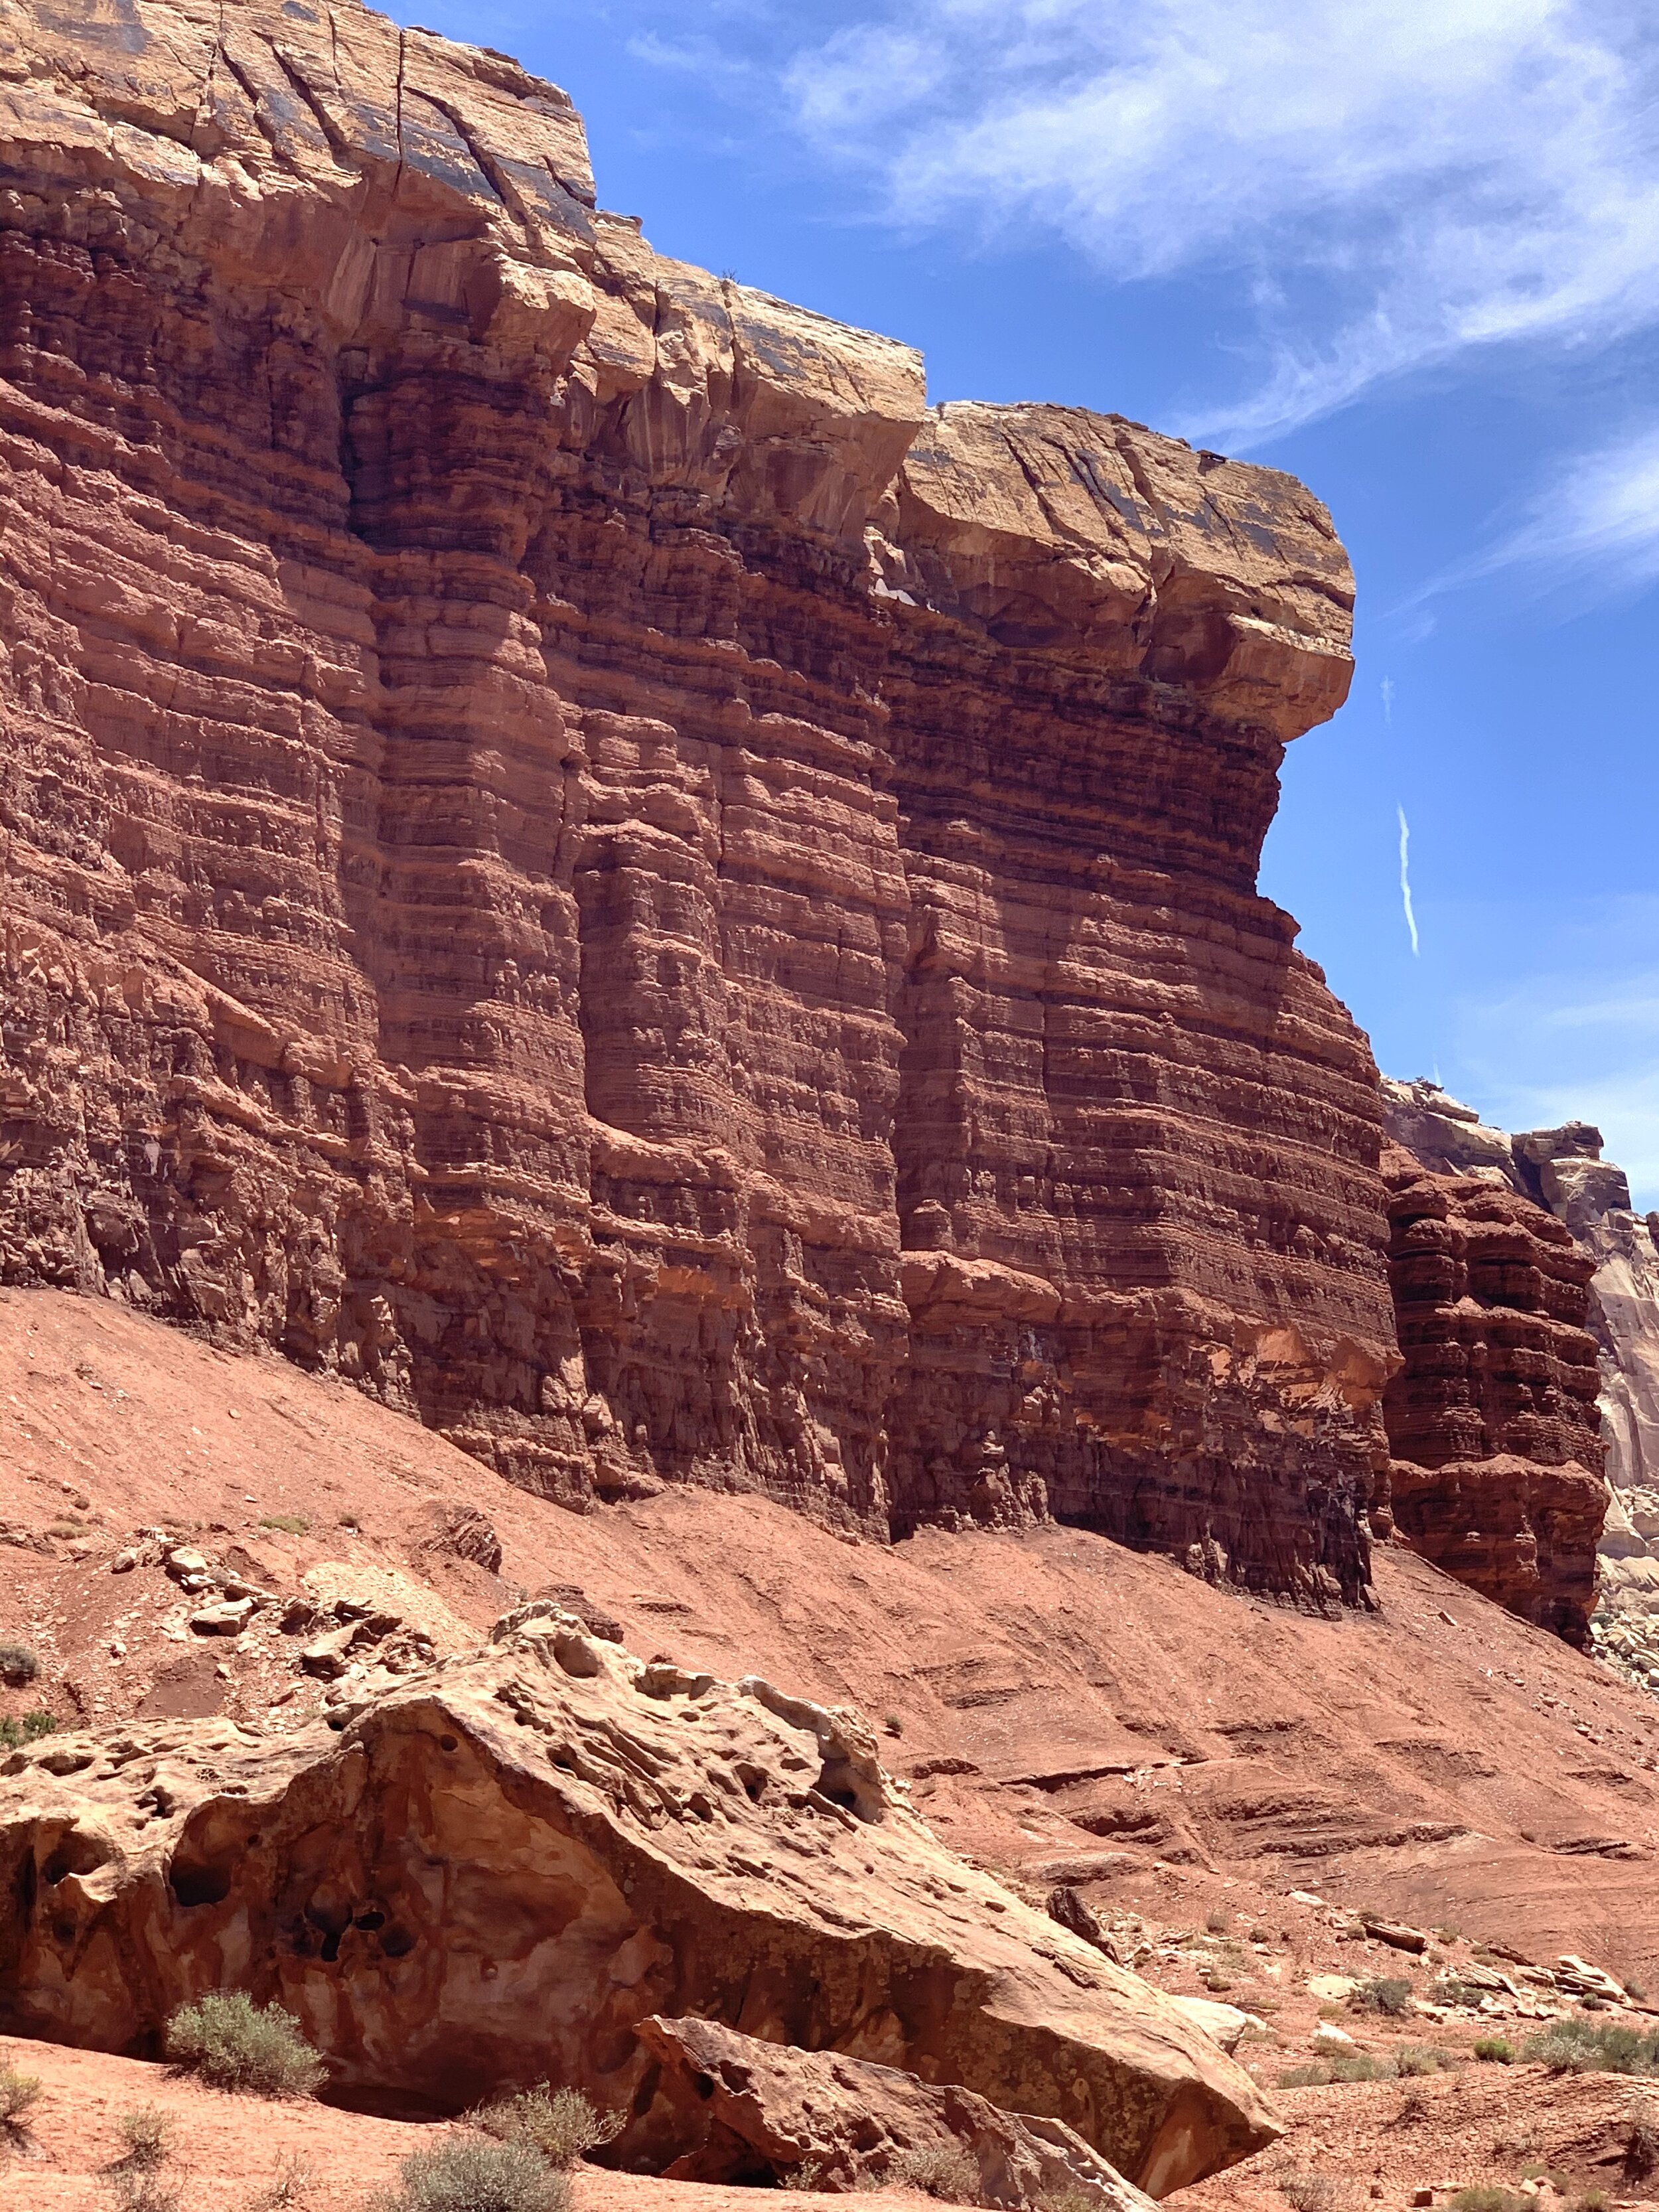  Capitol Reef National Park is about 140 west of Canyonlands and surrounds a long wrinkle in the earth known as the Waterpocket Fold. This area is filled with layers of golden sandstone, canyons, and beautiful rock formations.&nbsp; 